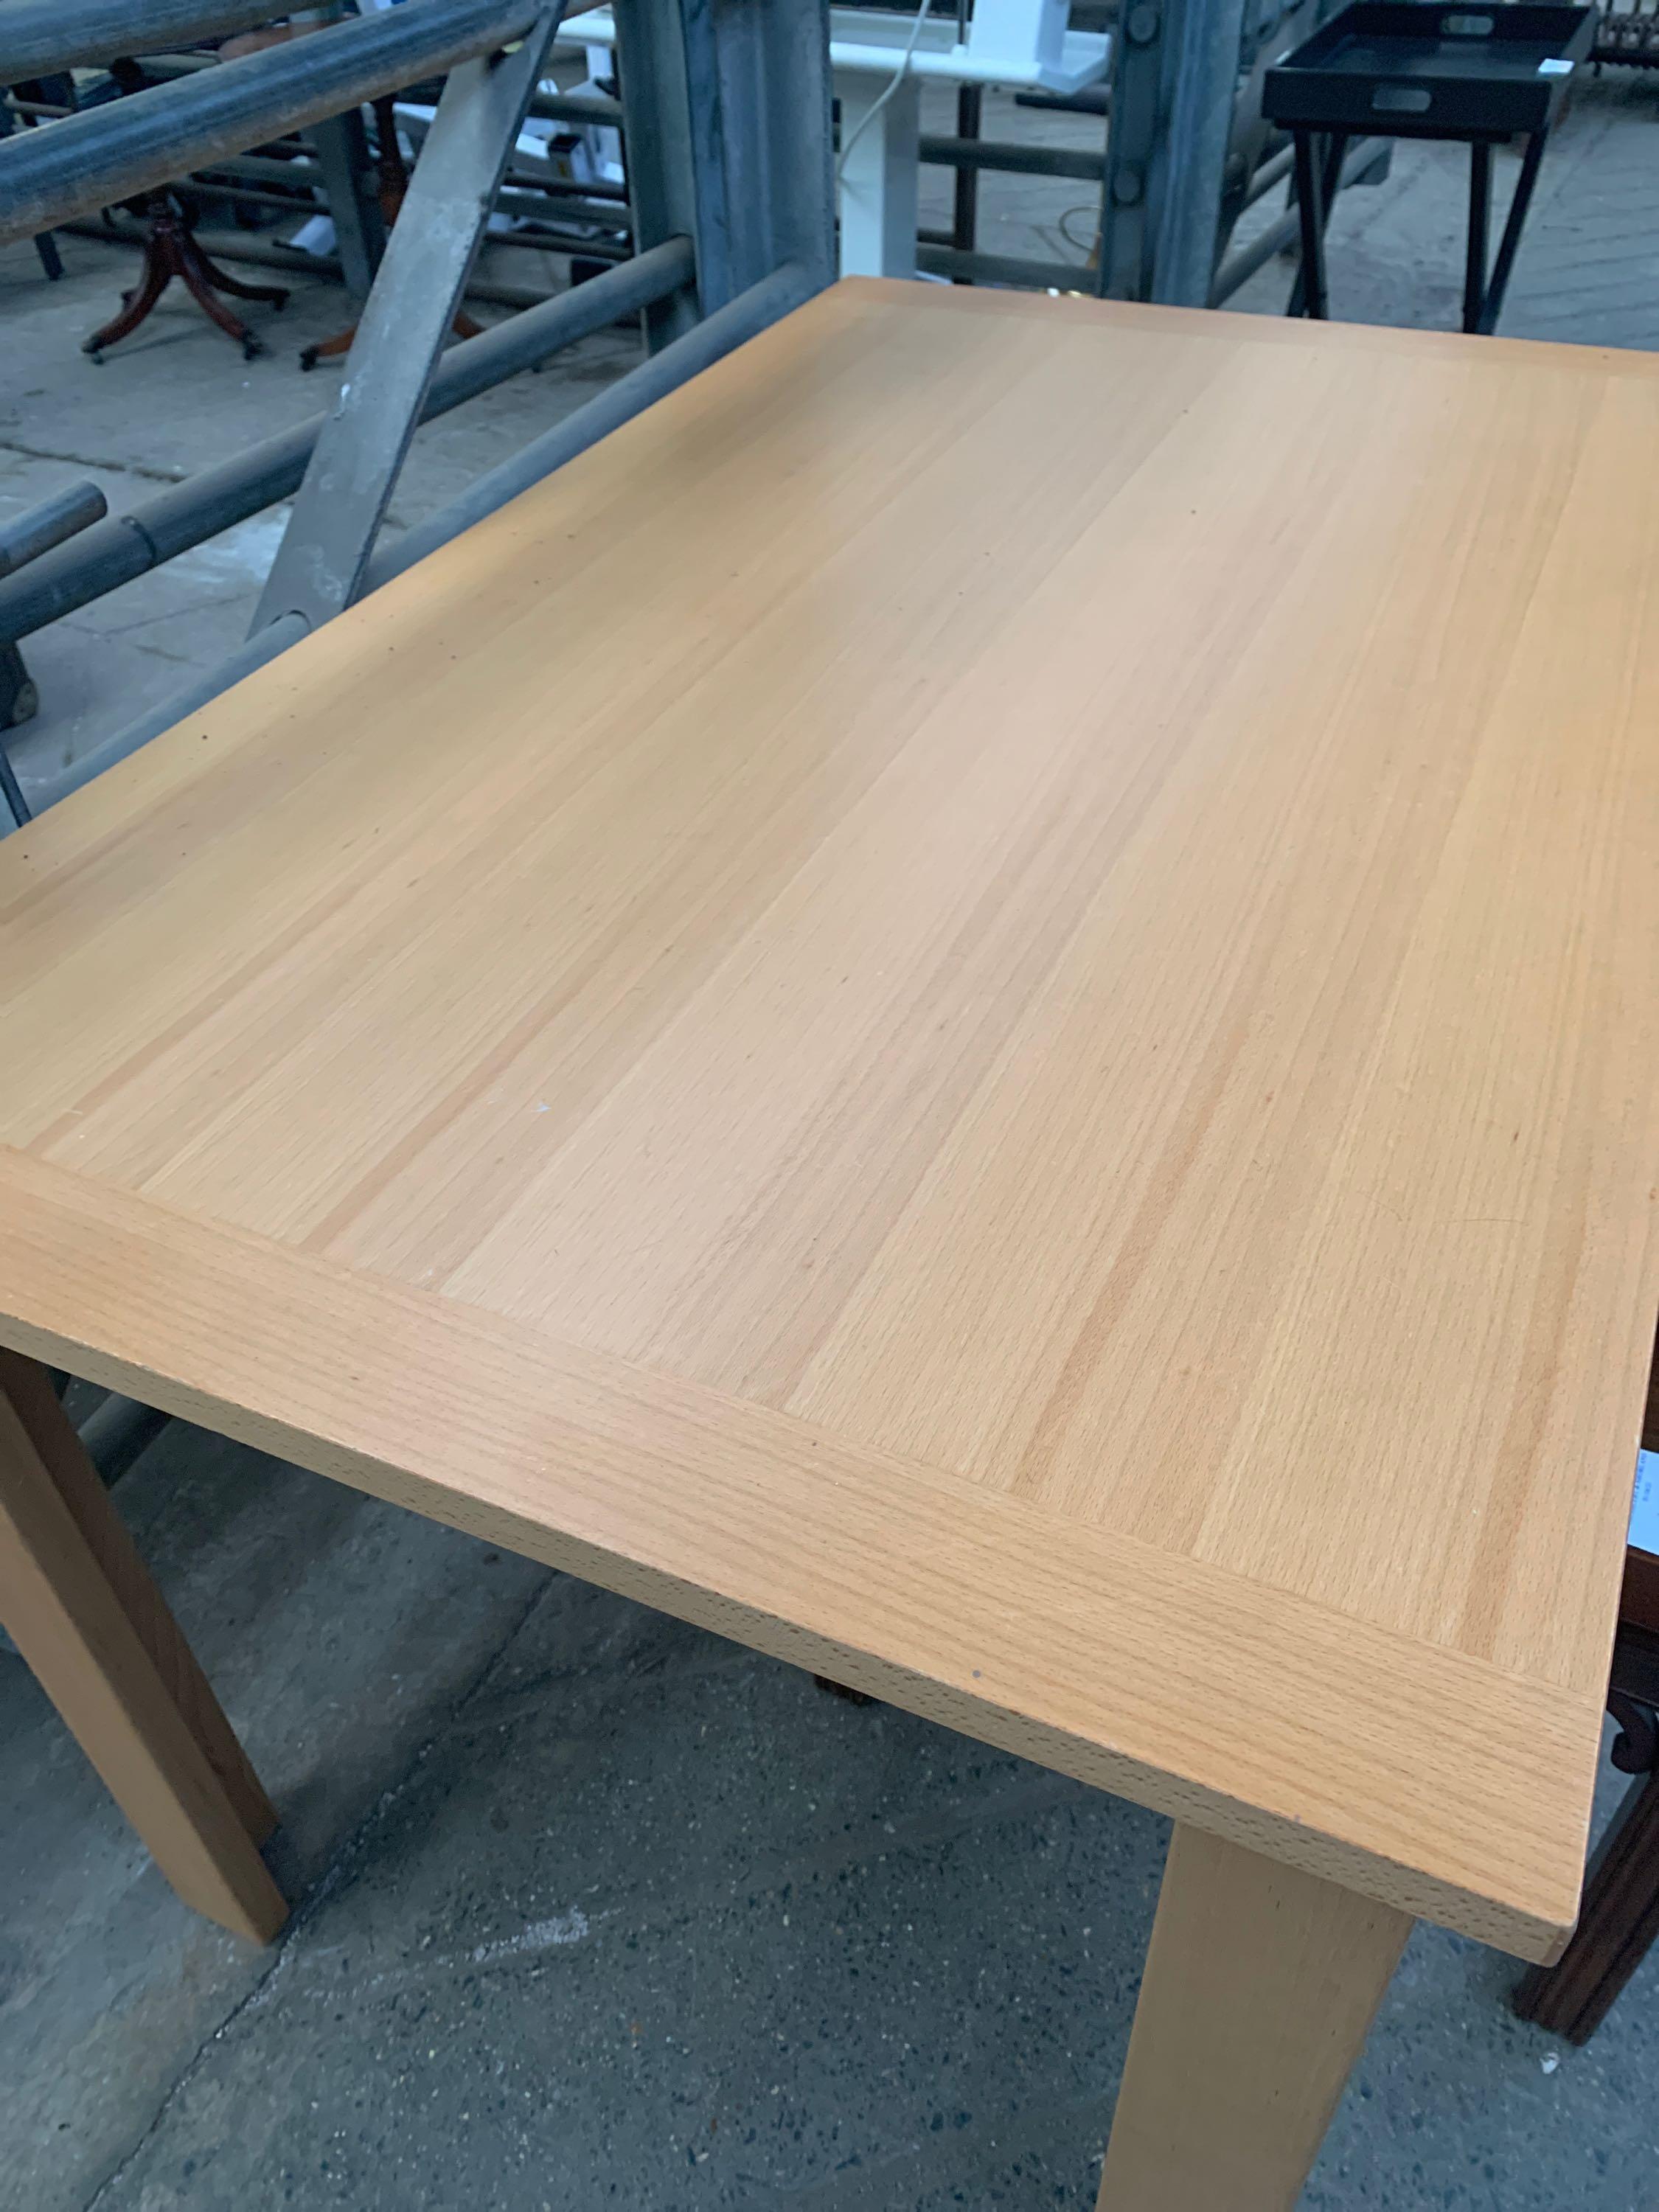 Beech laminate dining table - Image 4 of 4